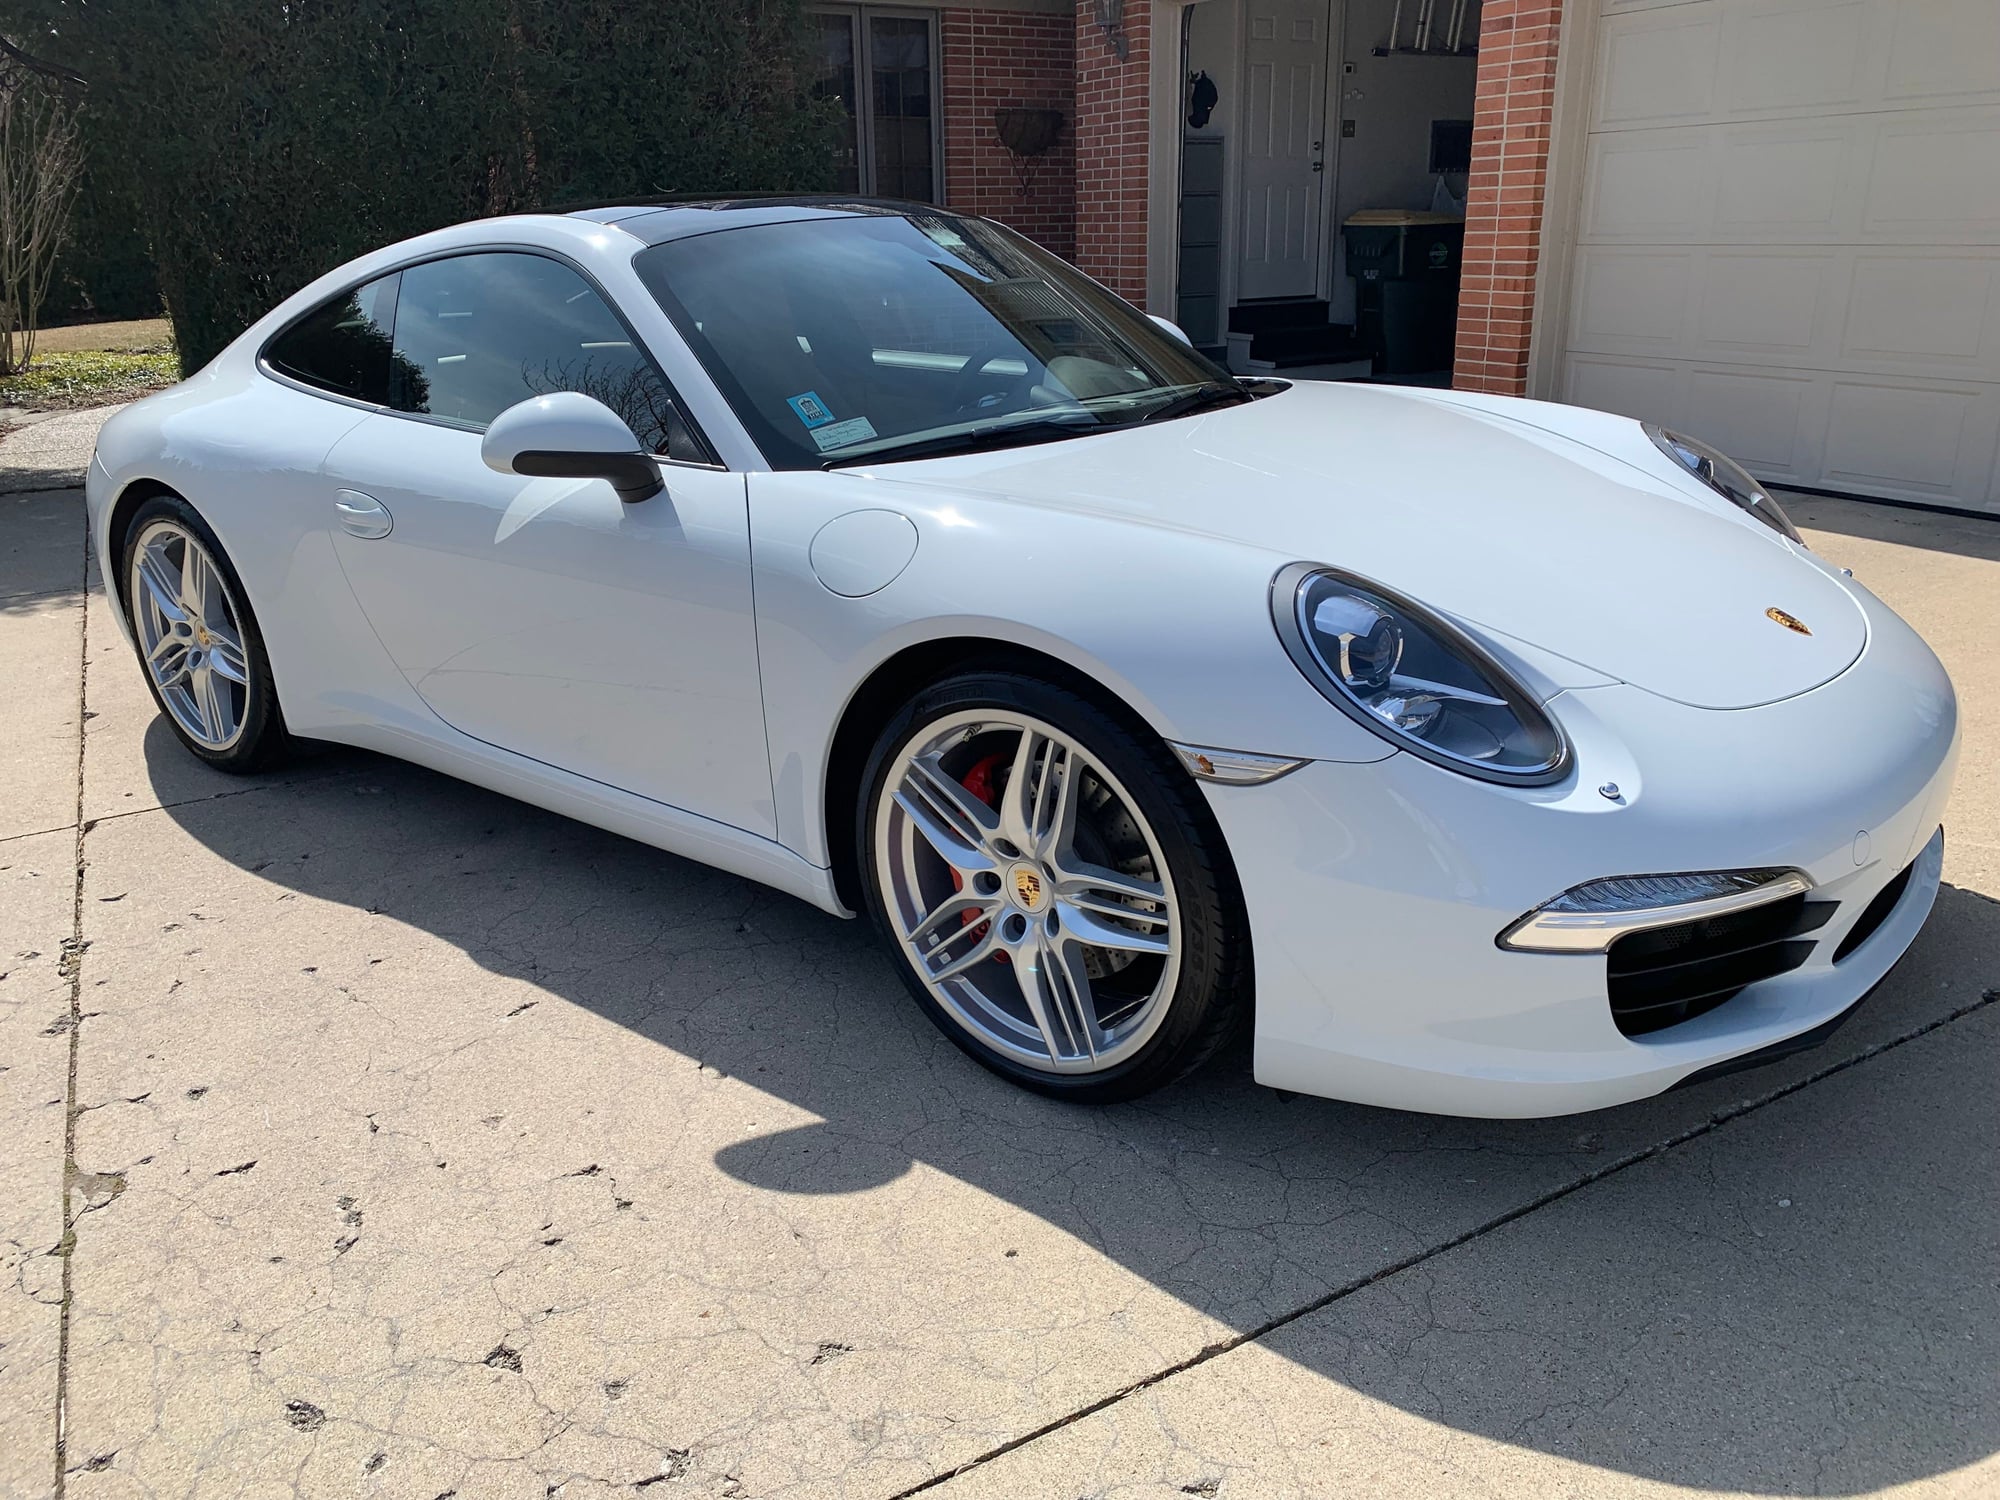 2014 Porsche 911 - 2014 Porsche 911 Carrera S - Too nice to Trade In! - 10k miles - CPO - MSRP $122k - Used - VIN WP0AB2A98ES120907 - 10,053 Miles - 6 cyl - 2WD - Automatic - Coupe - White - Libertyville, IL 60048, United States